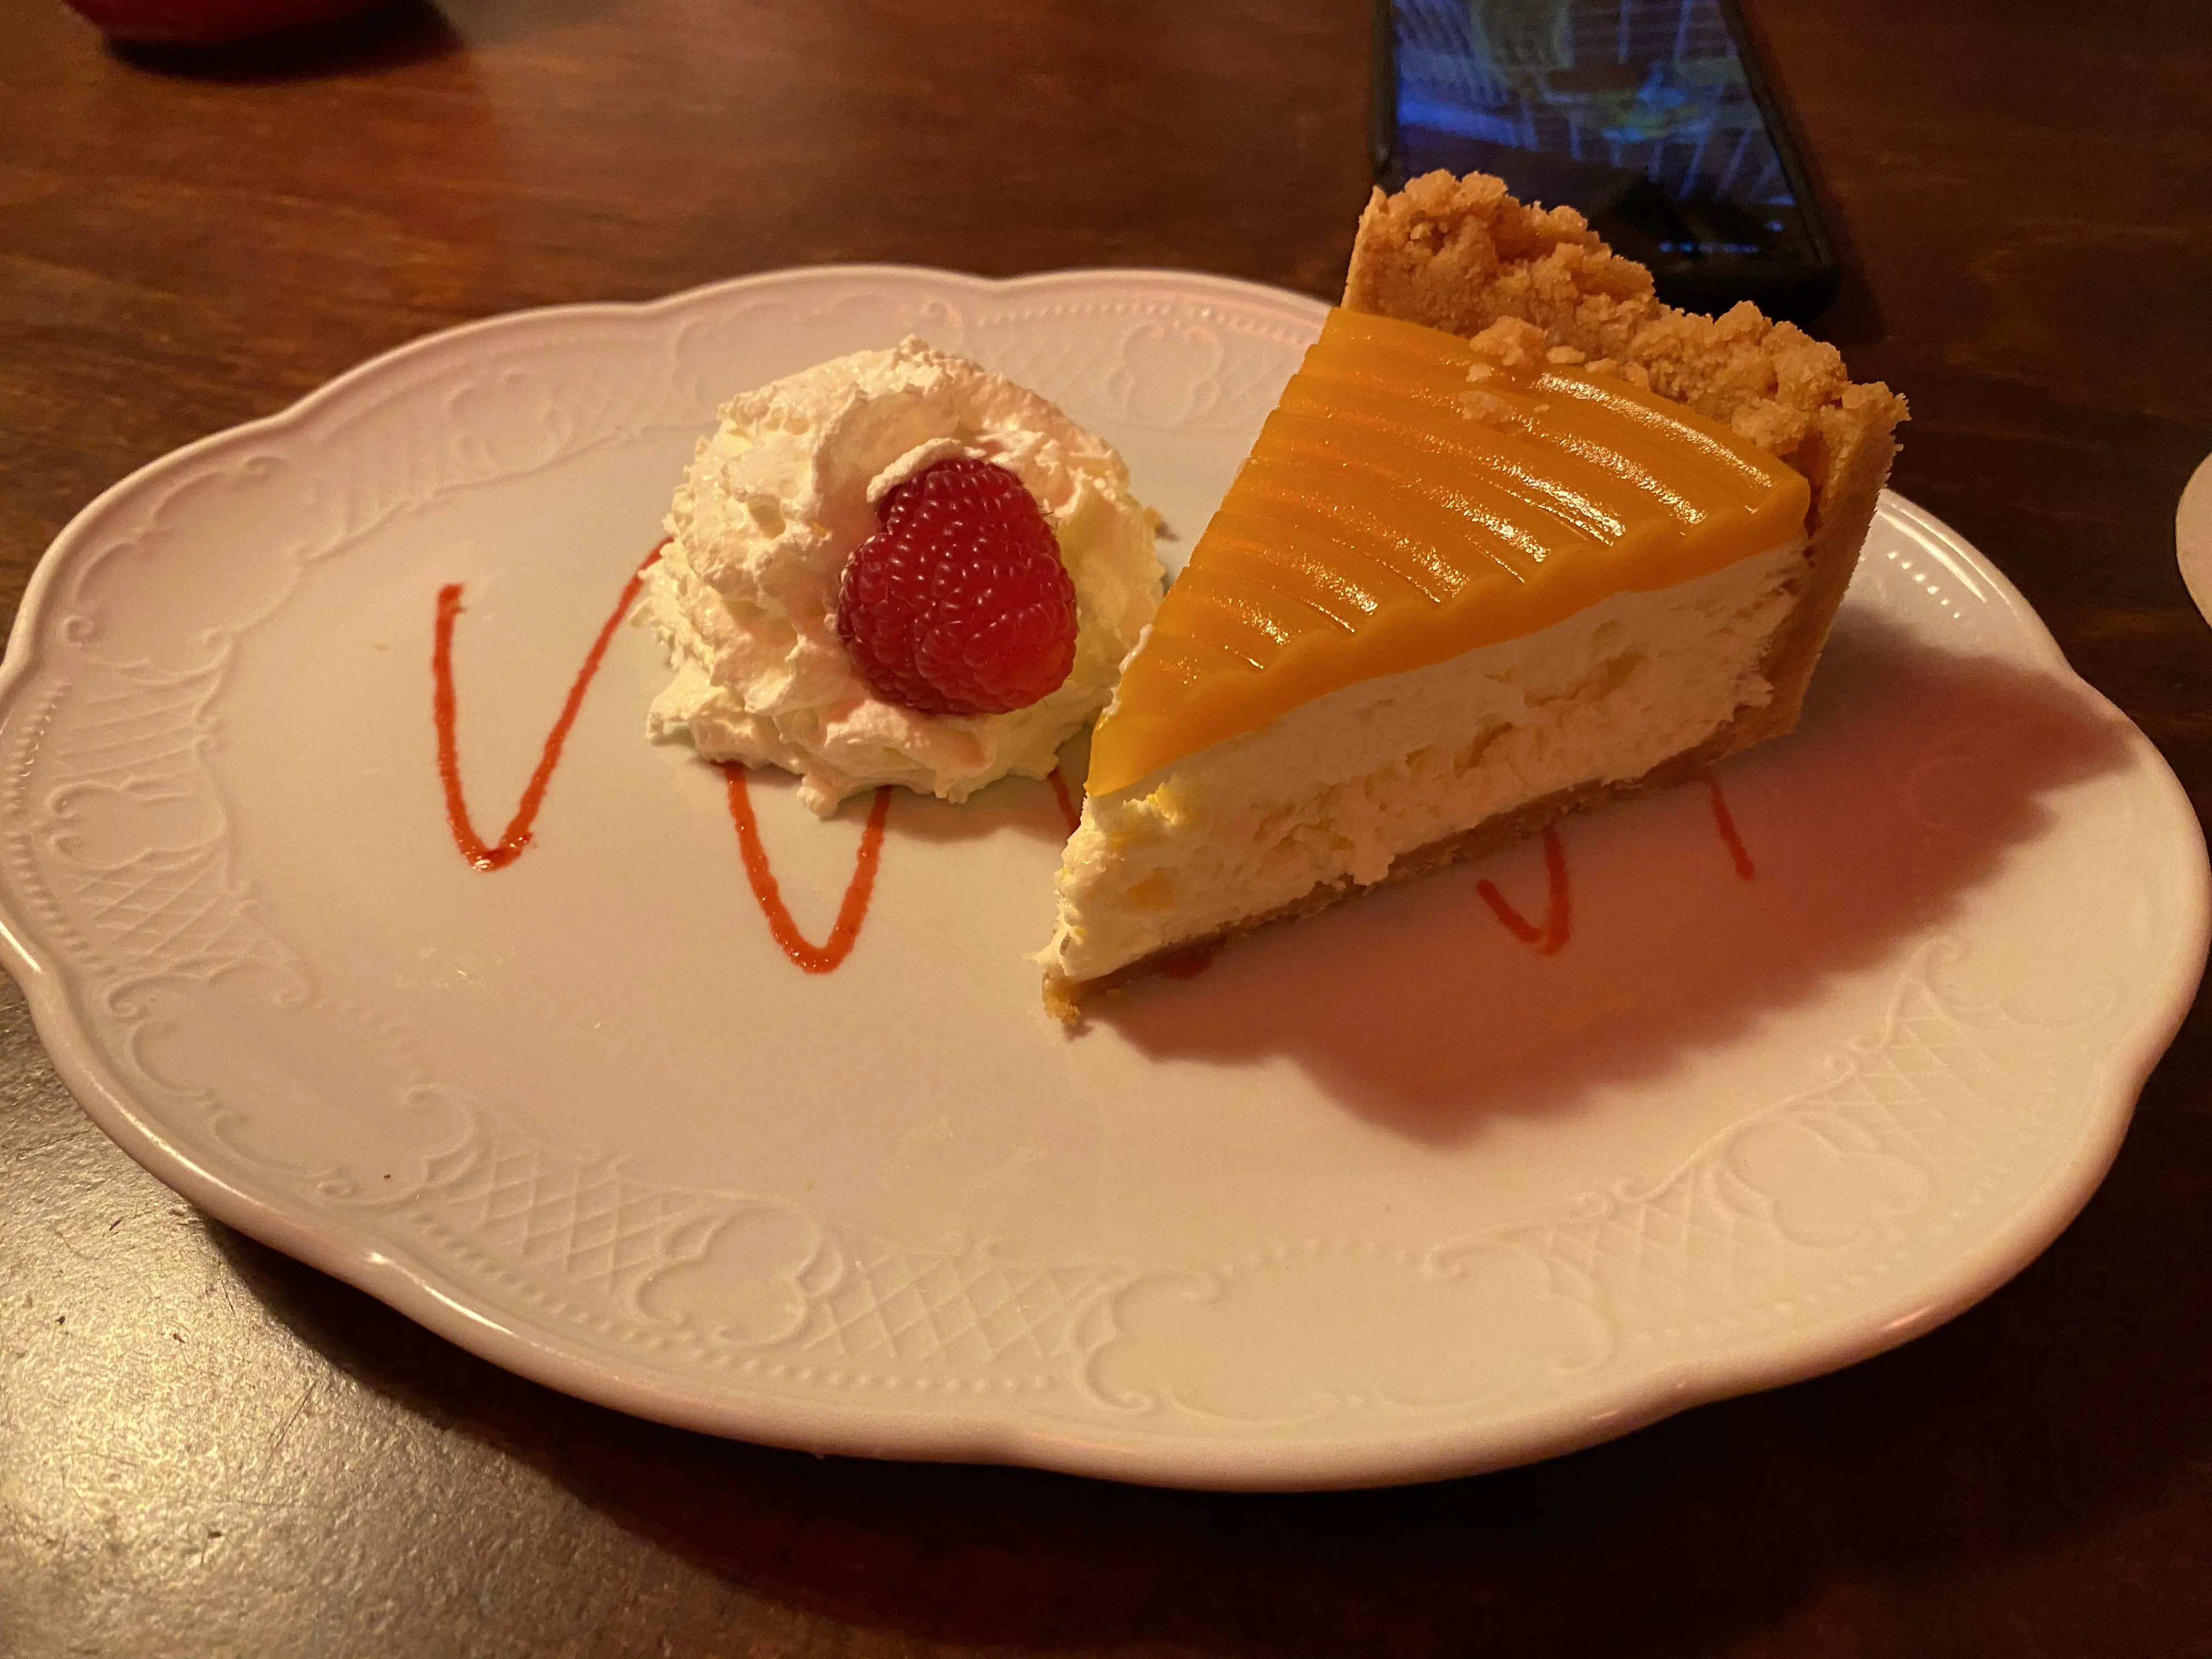 A picture of the food at the restaurant, a cheesecake as dessert